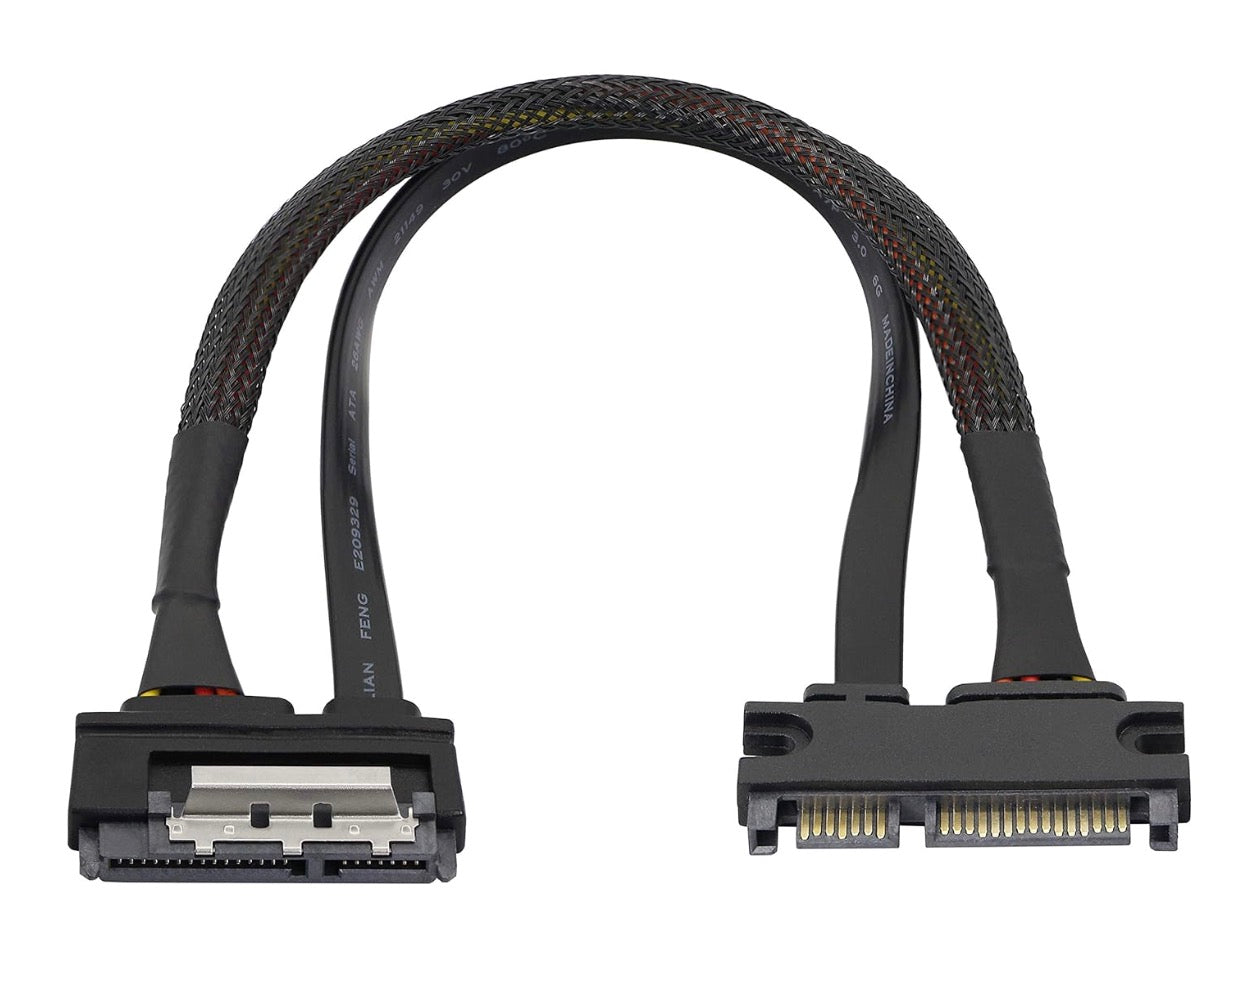 7+15 Sata Male to 22Pin Sata Female Data Power Extension Cable for HDD,SSD,Optical Drives, DVD Burners, PCI Cards